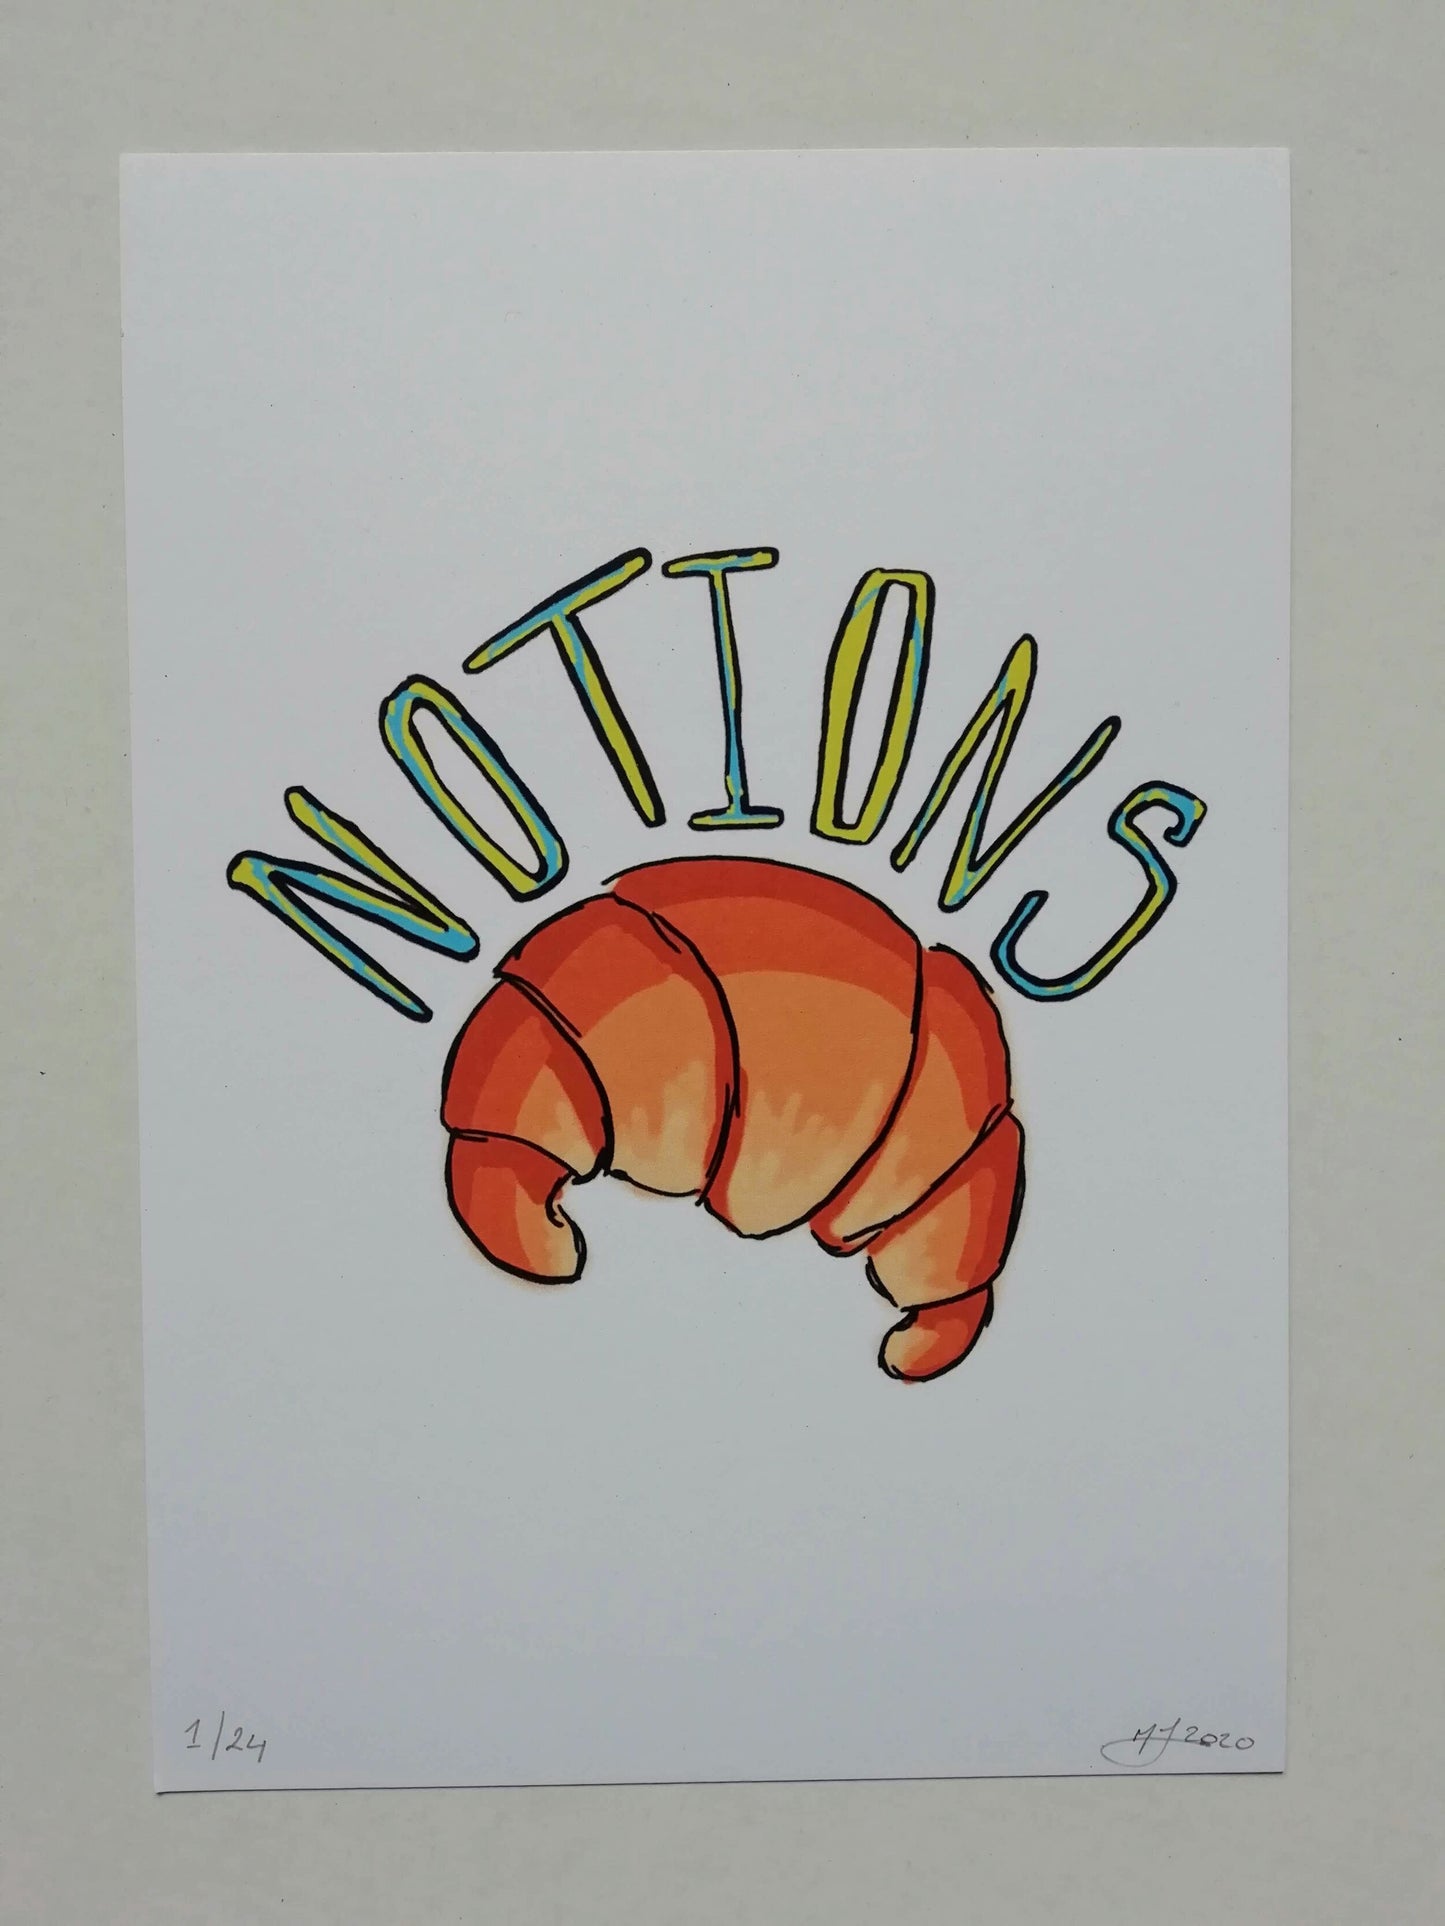 Notions - A5 Signed Limited Print